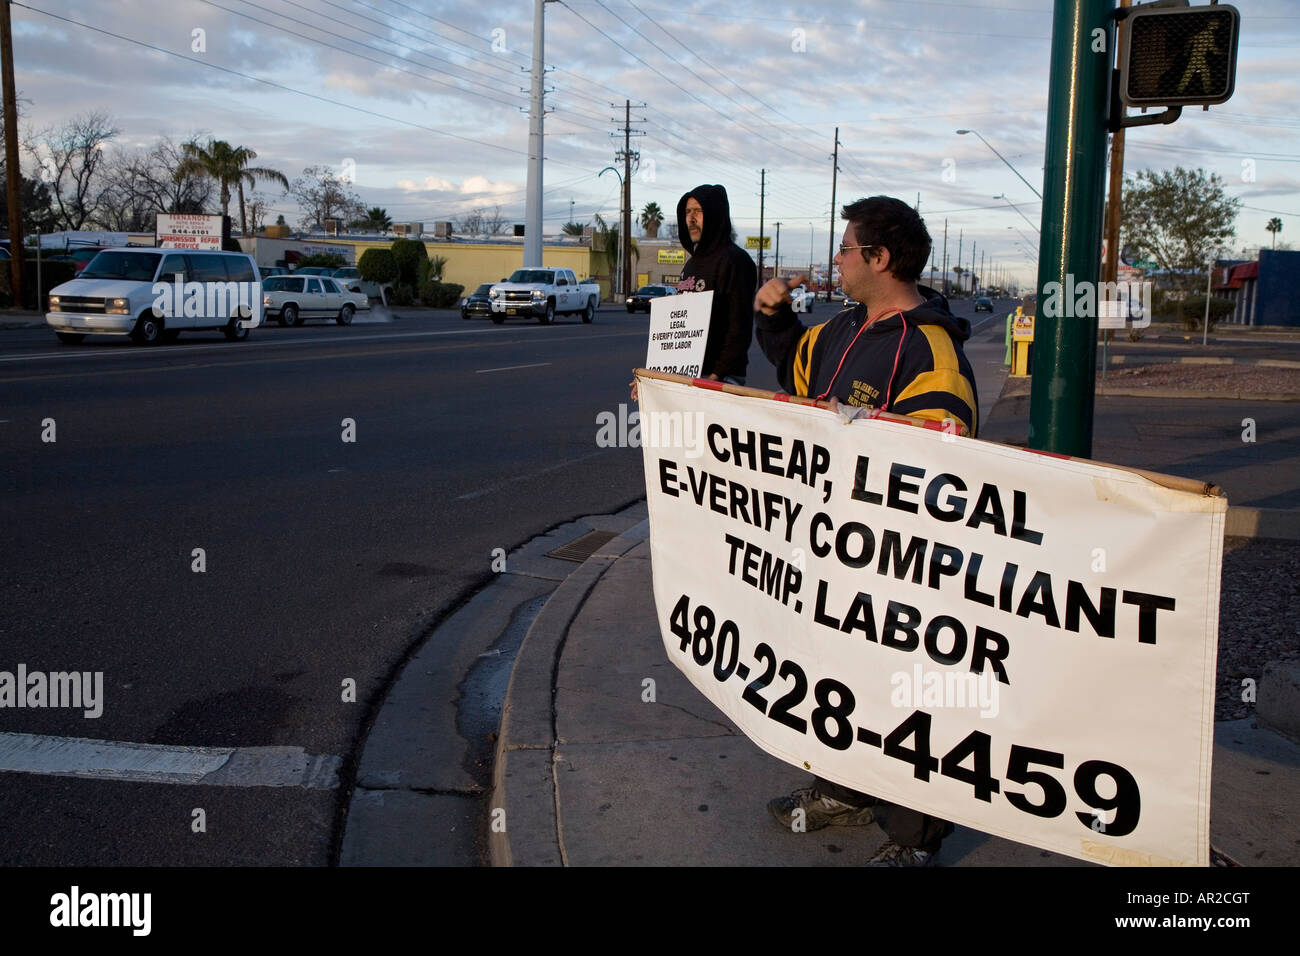 Temporary labor employer advertises that he provides cheap, legal workers Stock Photo